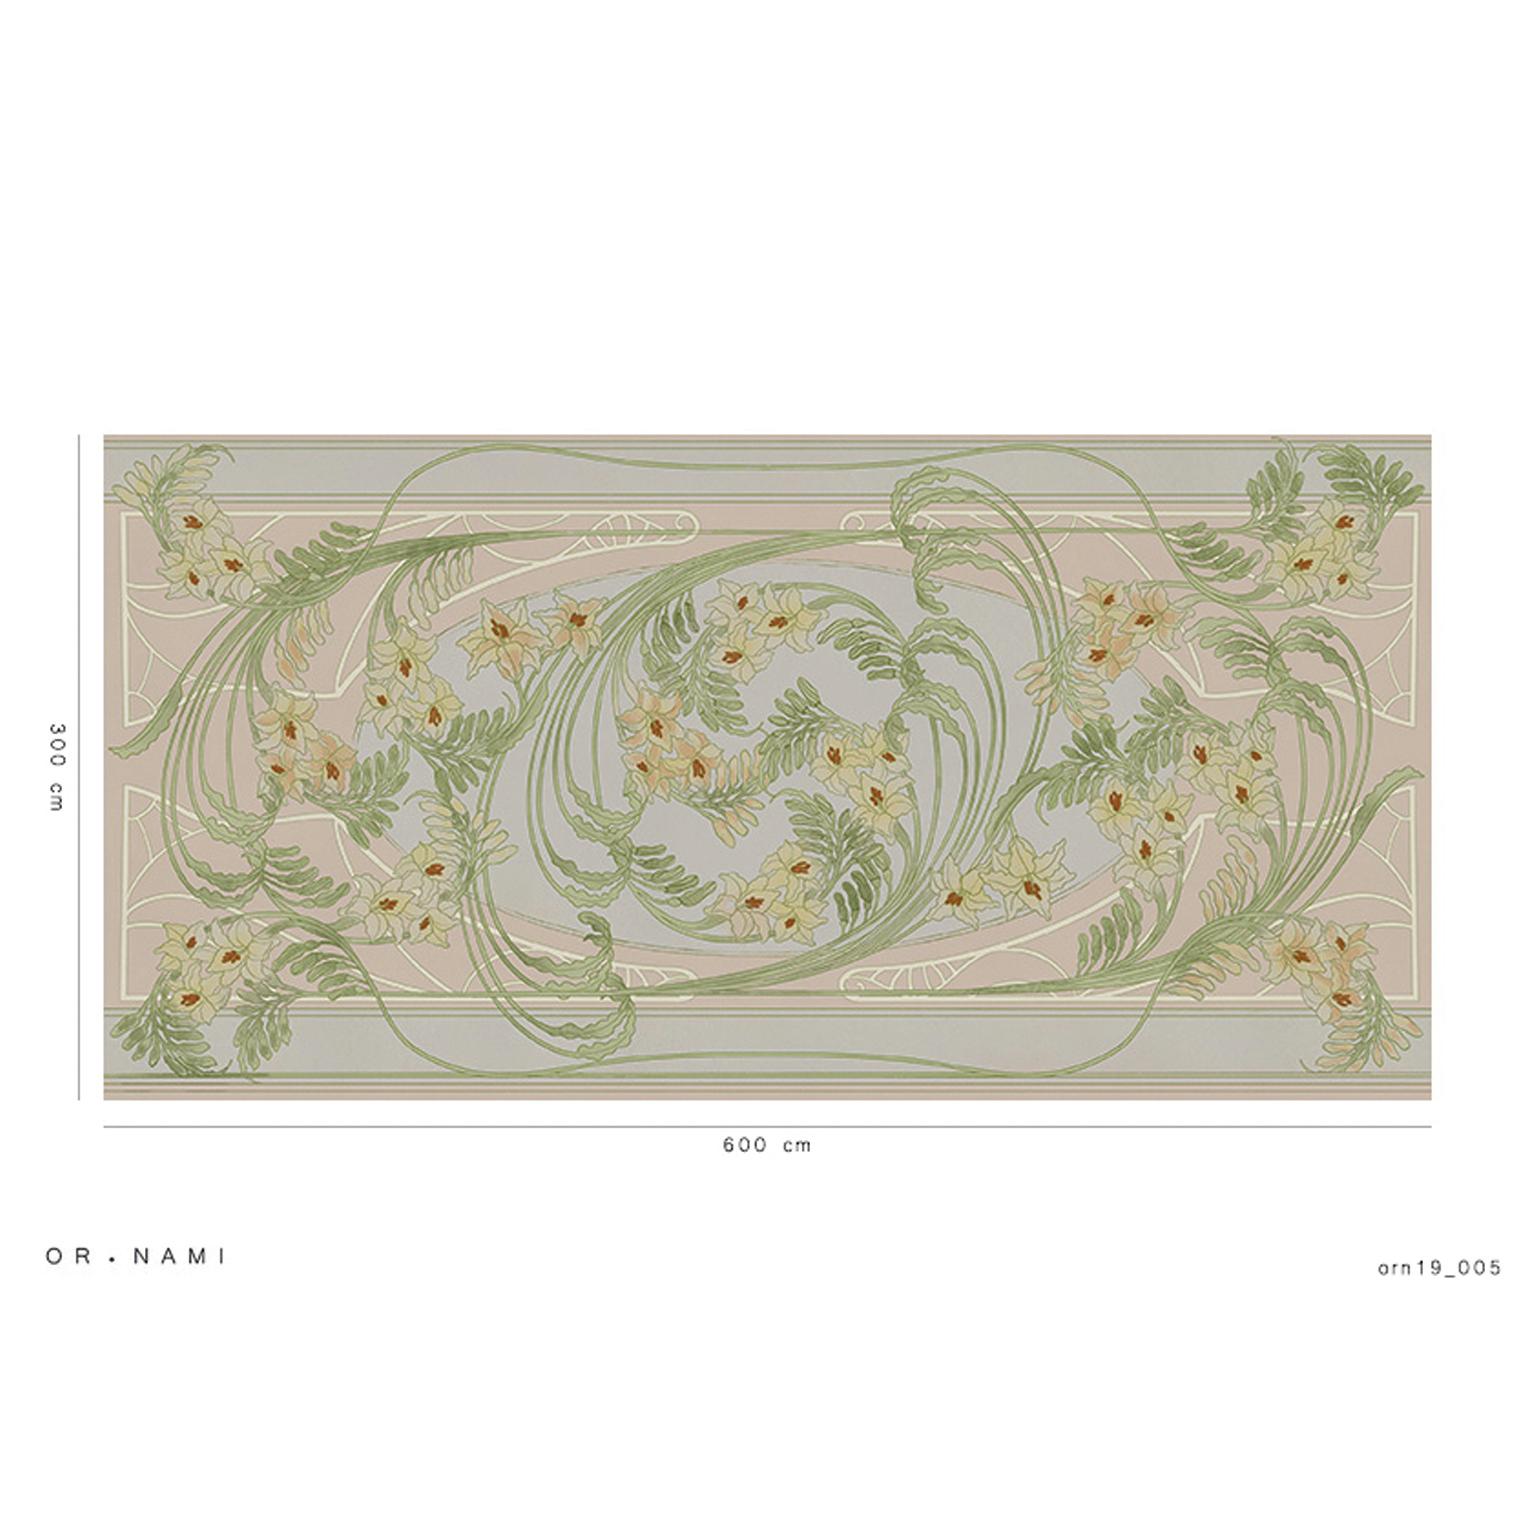 Contemporary Ornami Art Nouveau Spring Vinyl Wallpaper Made in Italy Digital Printing For Sale